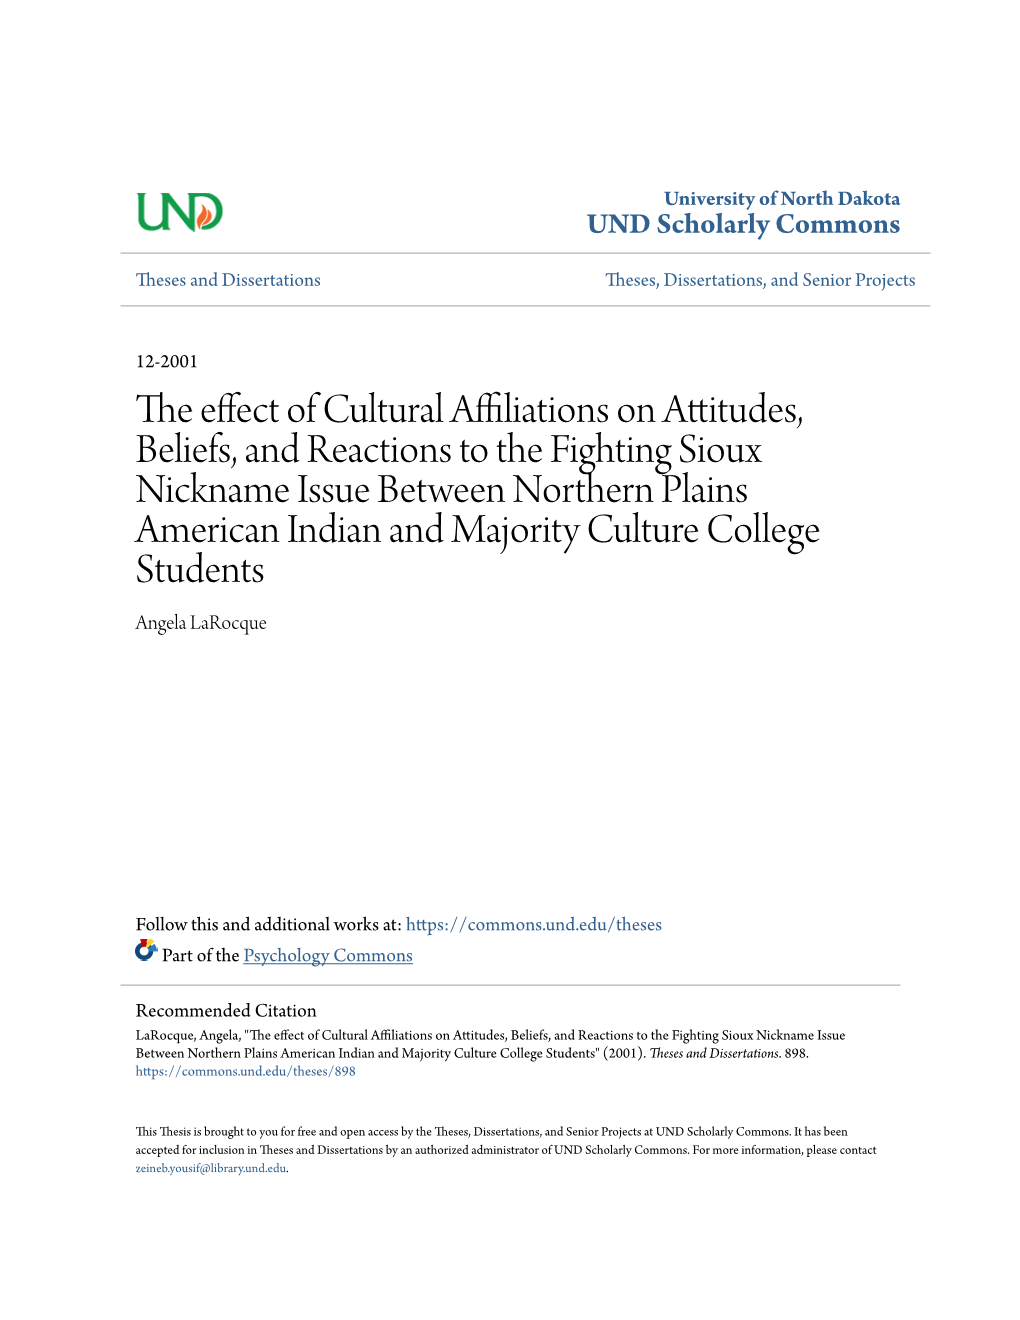 The Effect of Cultural Affiliations on Attitudes, Beliefs, and Reactions To